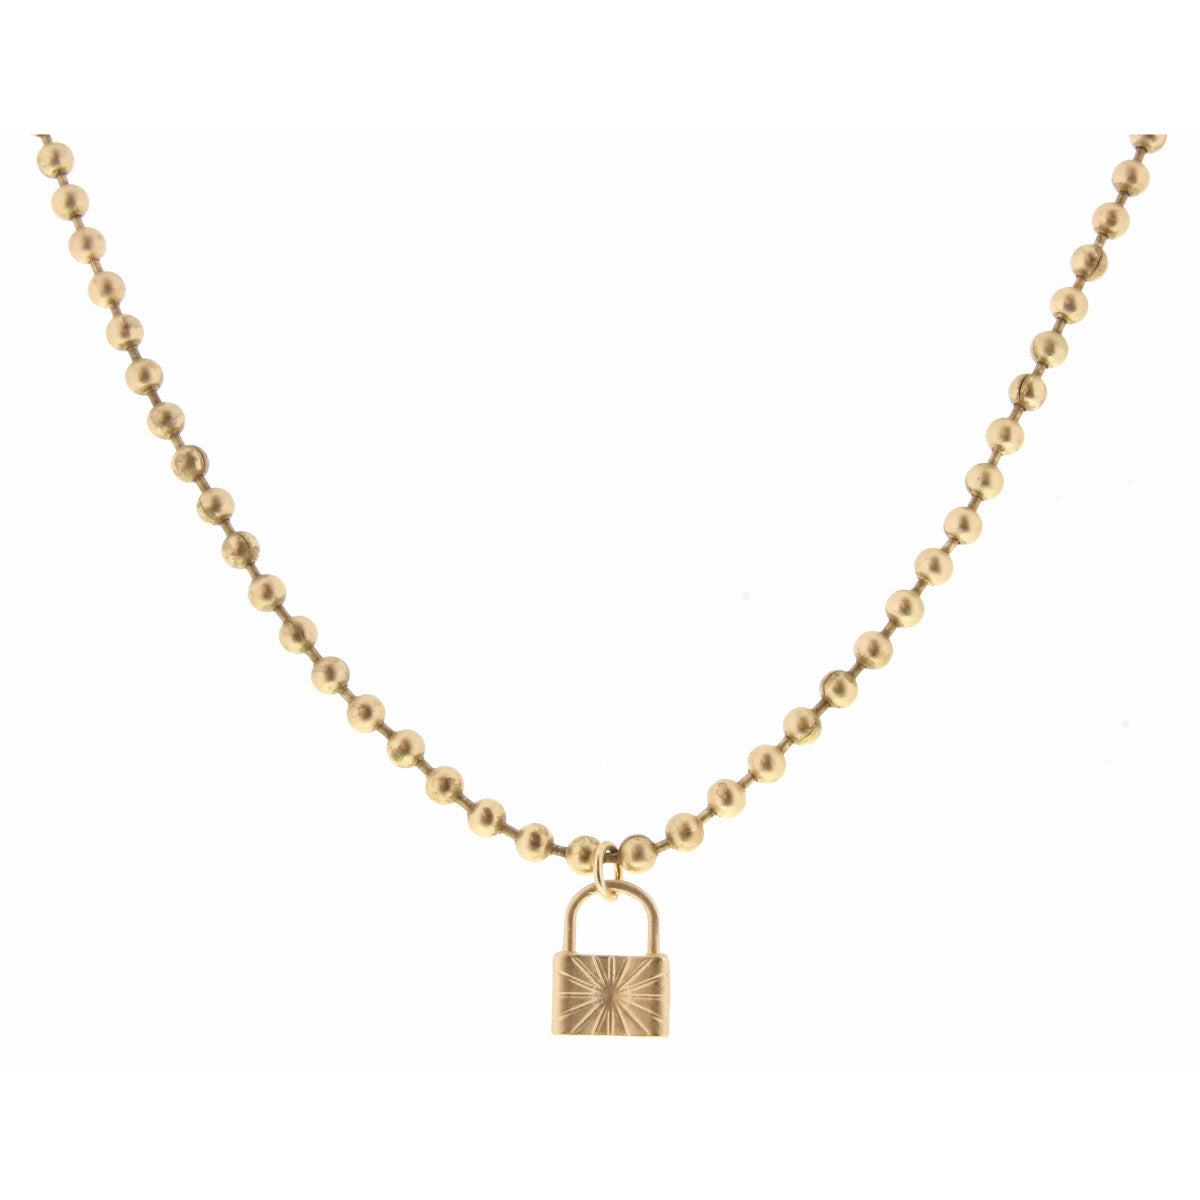 16" Textured Padlock on Gold Ball Chain Necklace